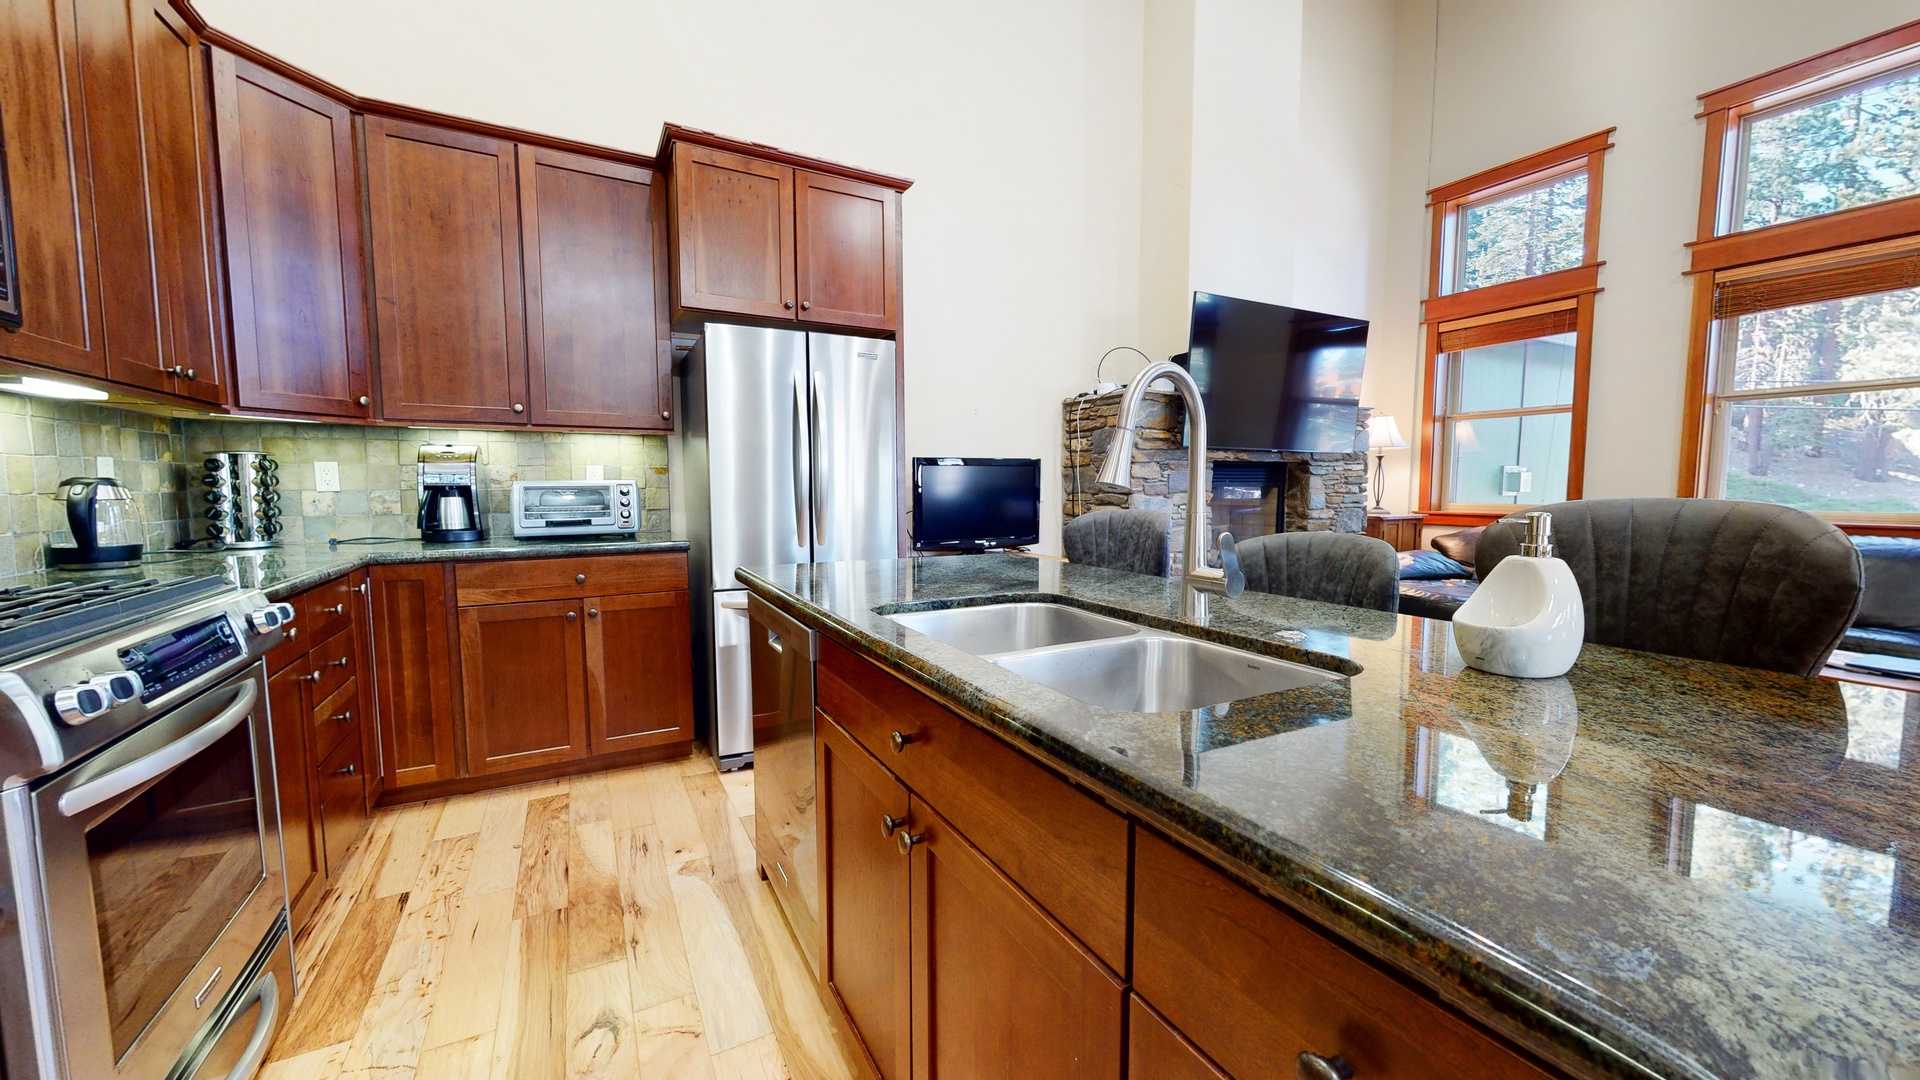 Kitchen with drip coffee maker, blender, dishwasher, gas stovetop and more